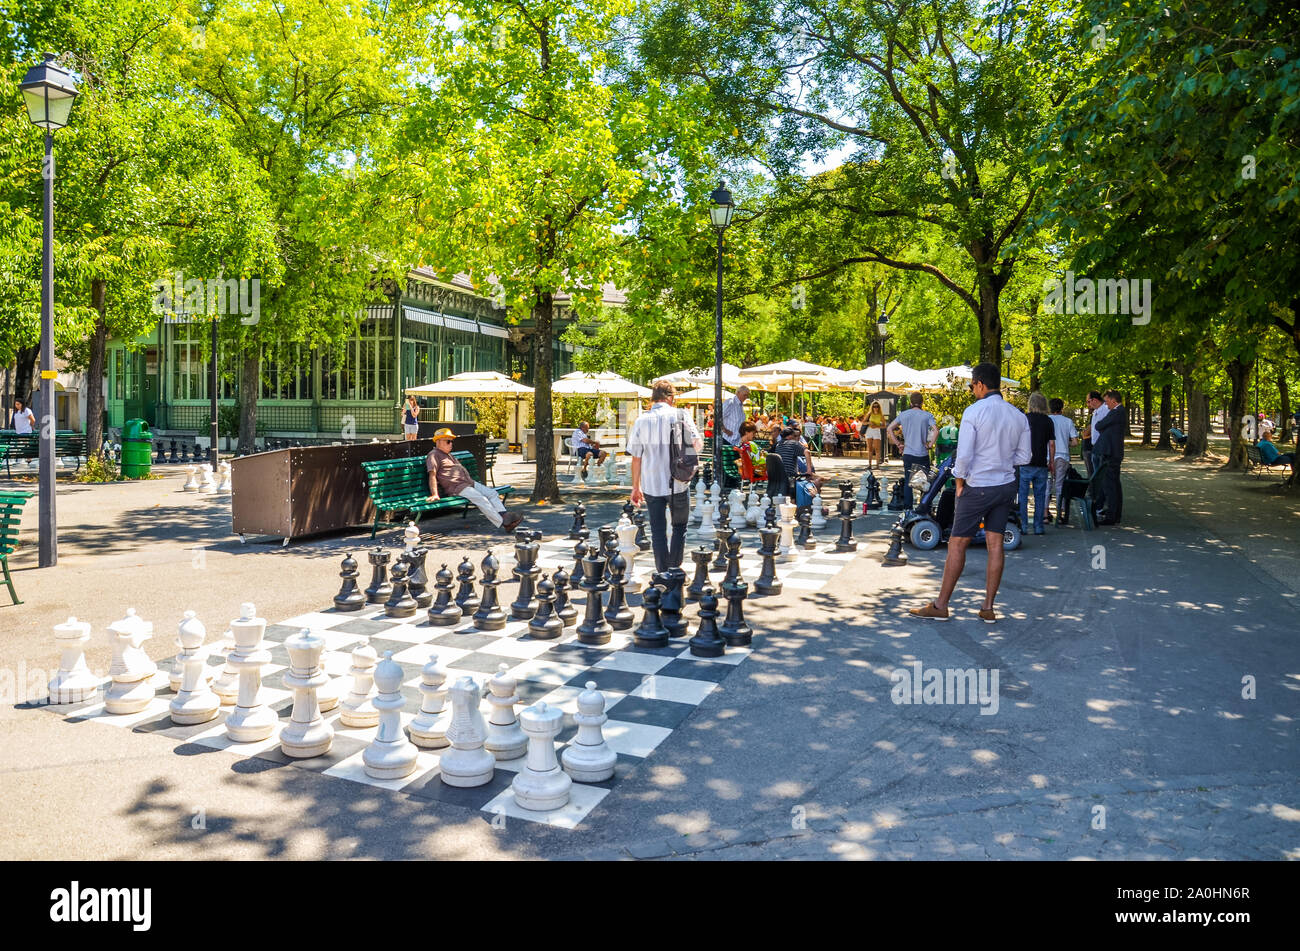 Geneva, Switzerland - July 19, 2019: People playing an outdoor chess game with giant chess pieces in the Parc des Bastions. Big chess boards are located at the entrance to the park in the city center. Stock Photo